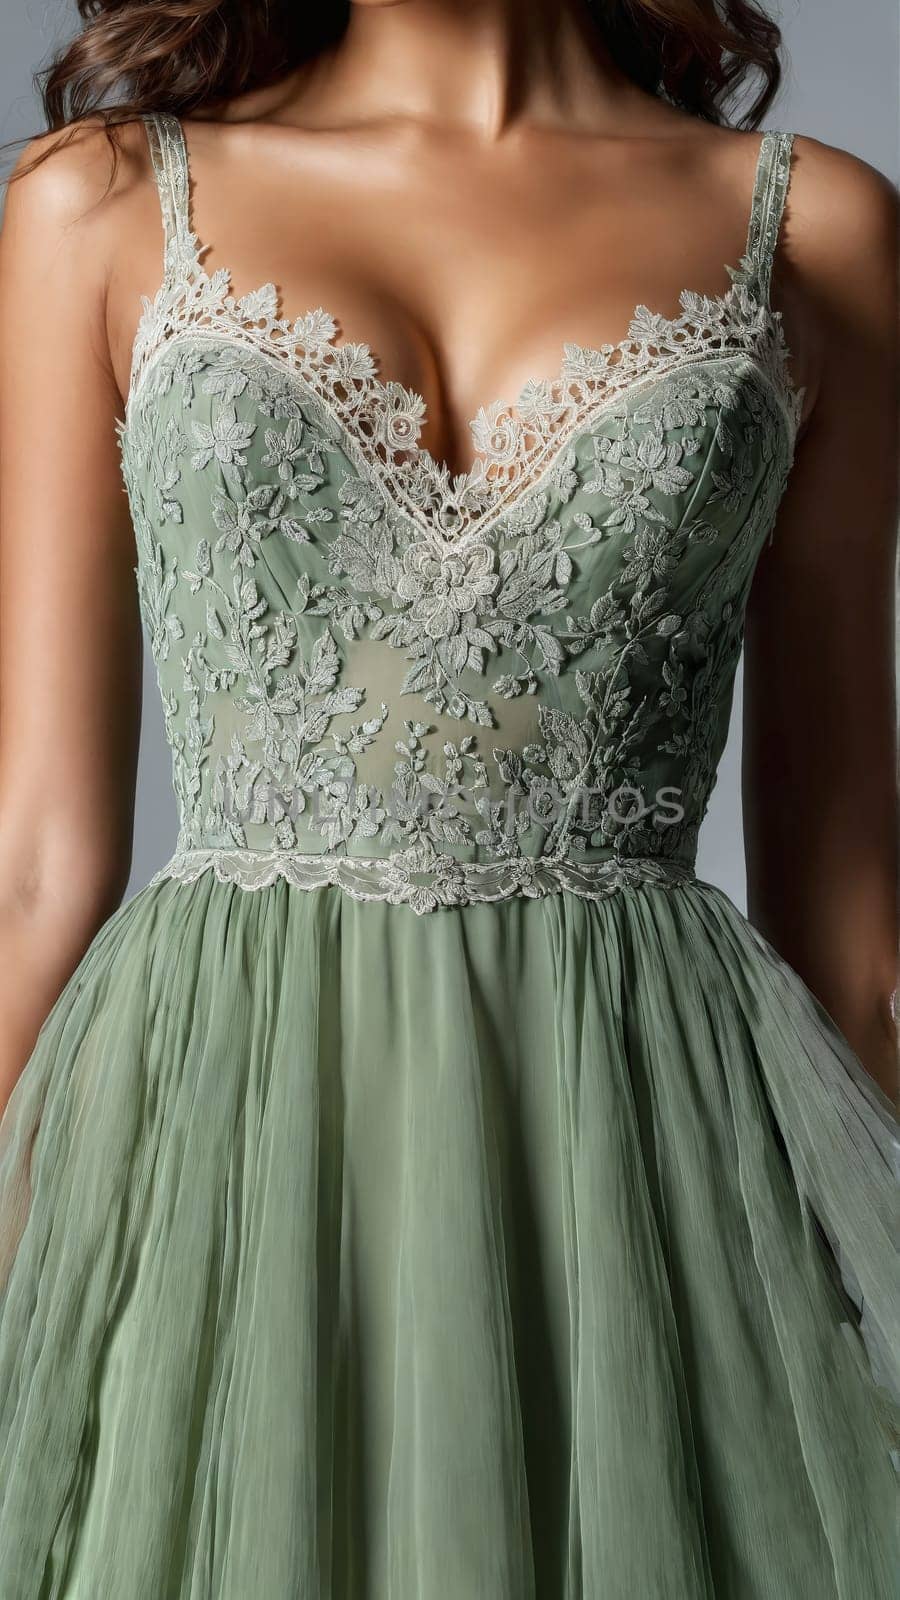 Chiffon Sage Chemise A romantic sage green chiffon chemise with a lace bodice and a flowing skirt by panophotograph